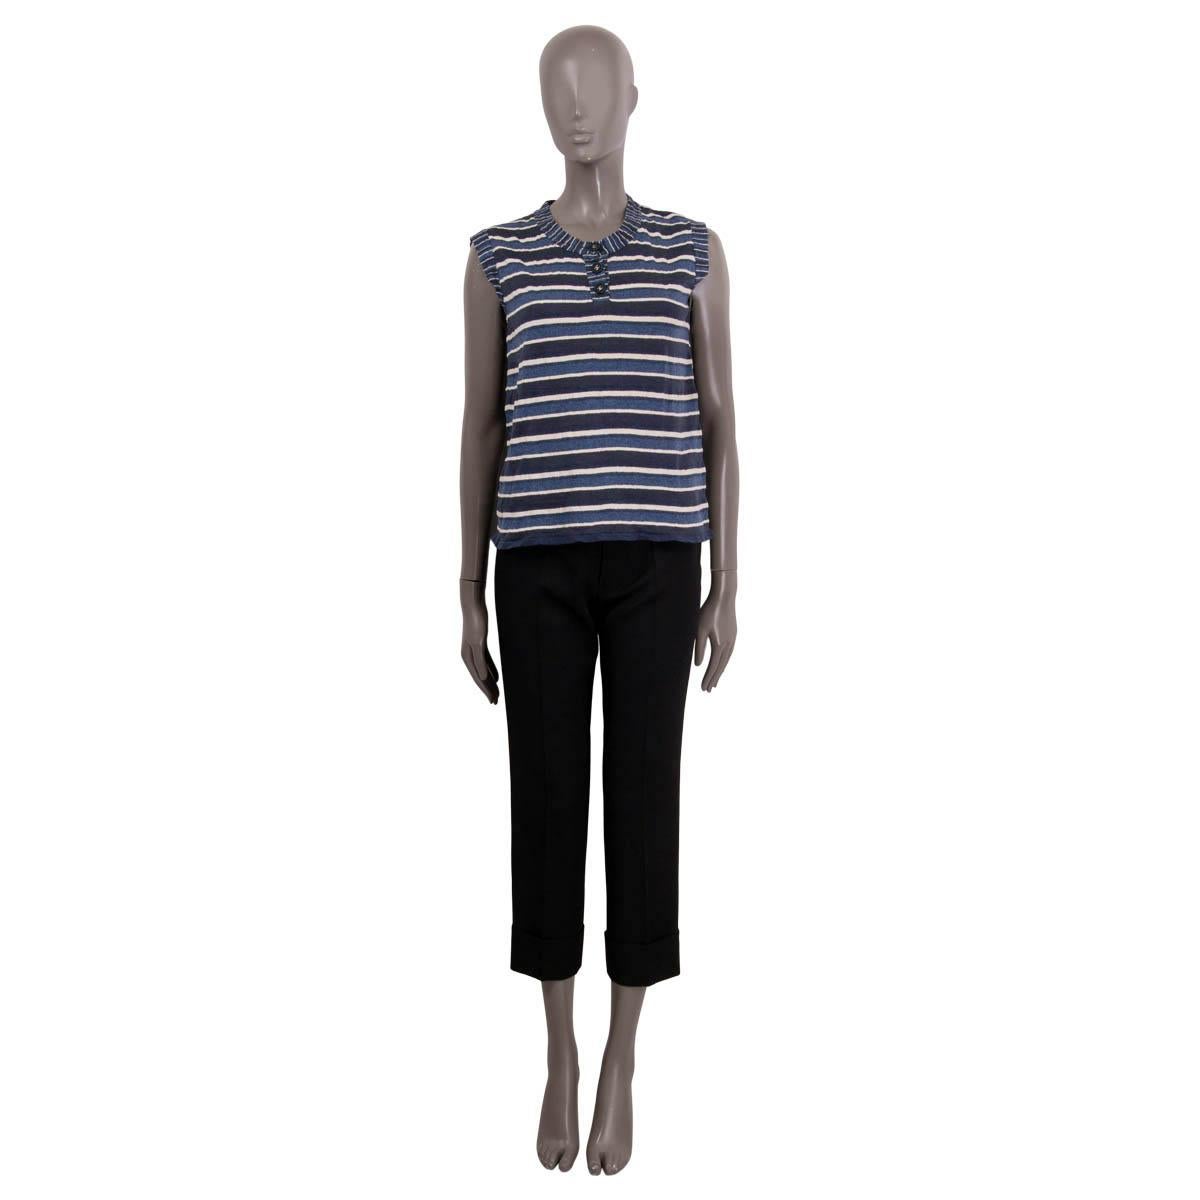 100% authentic Chanel 2007 sleeveless striped t-shirt in blue, navy and off-white cotton (50%), silk (44%) and nylon (6%). The design has three CC embellished denim buttons. Has been worn and is in excellent condition.